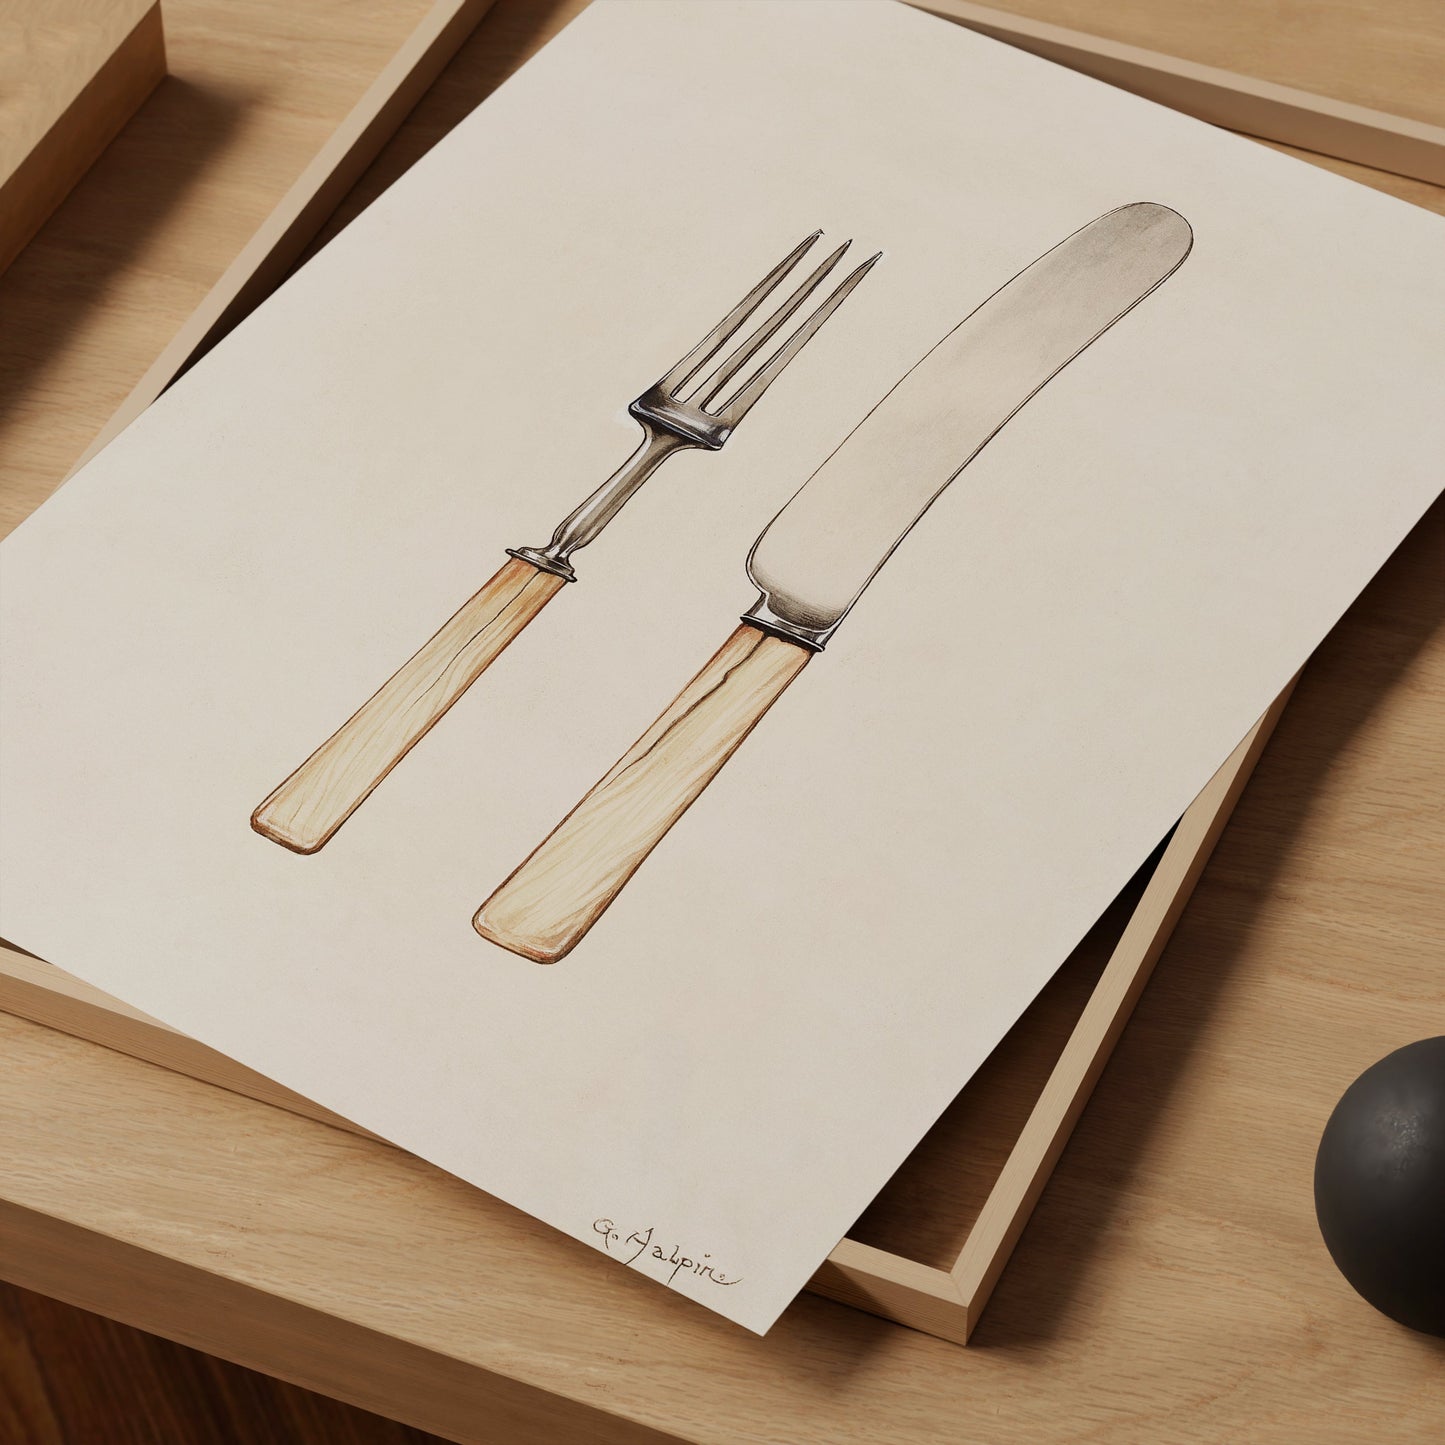 a drawing of two forks and a knife